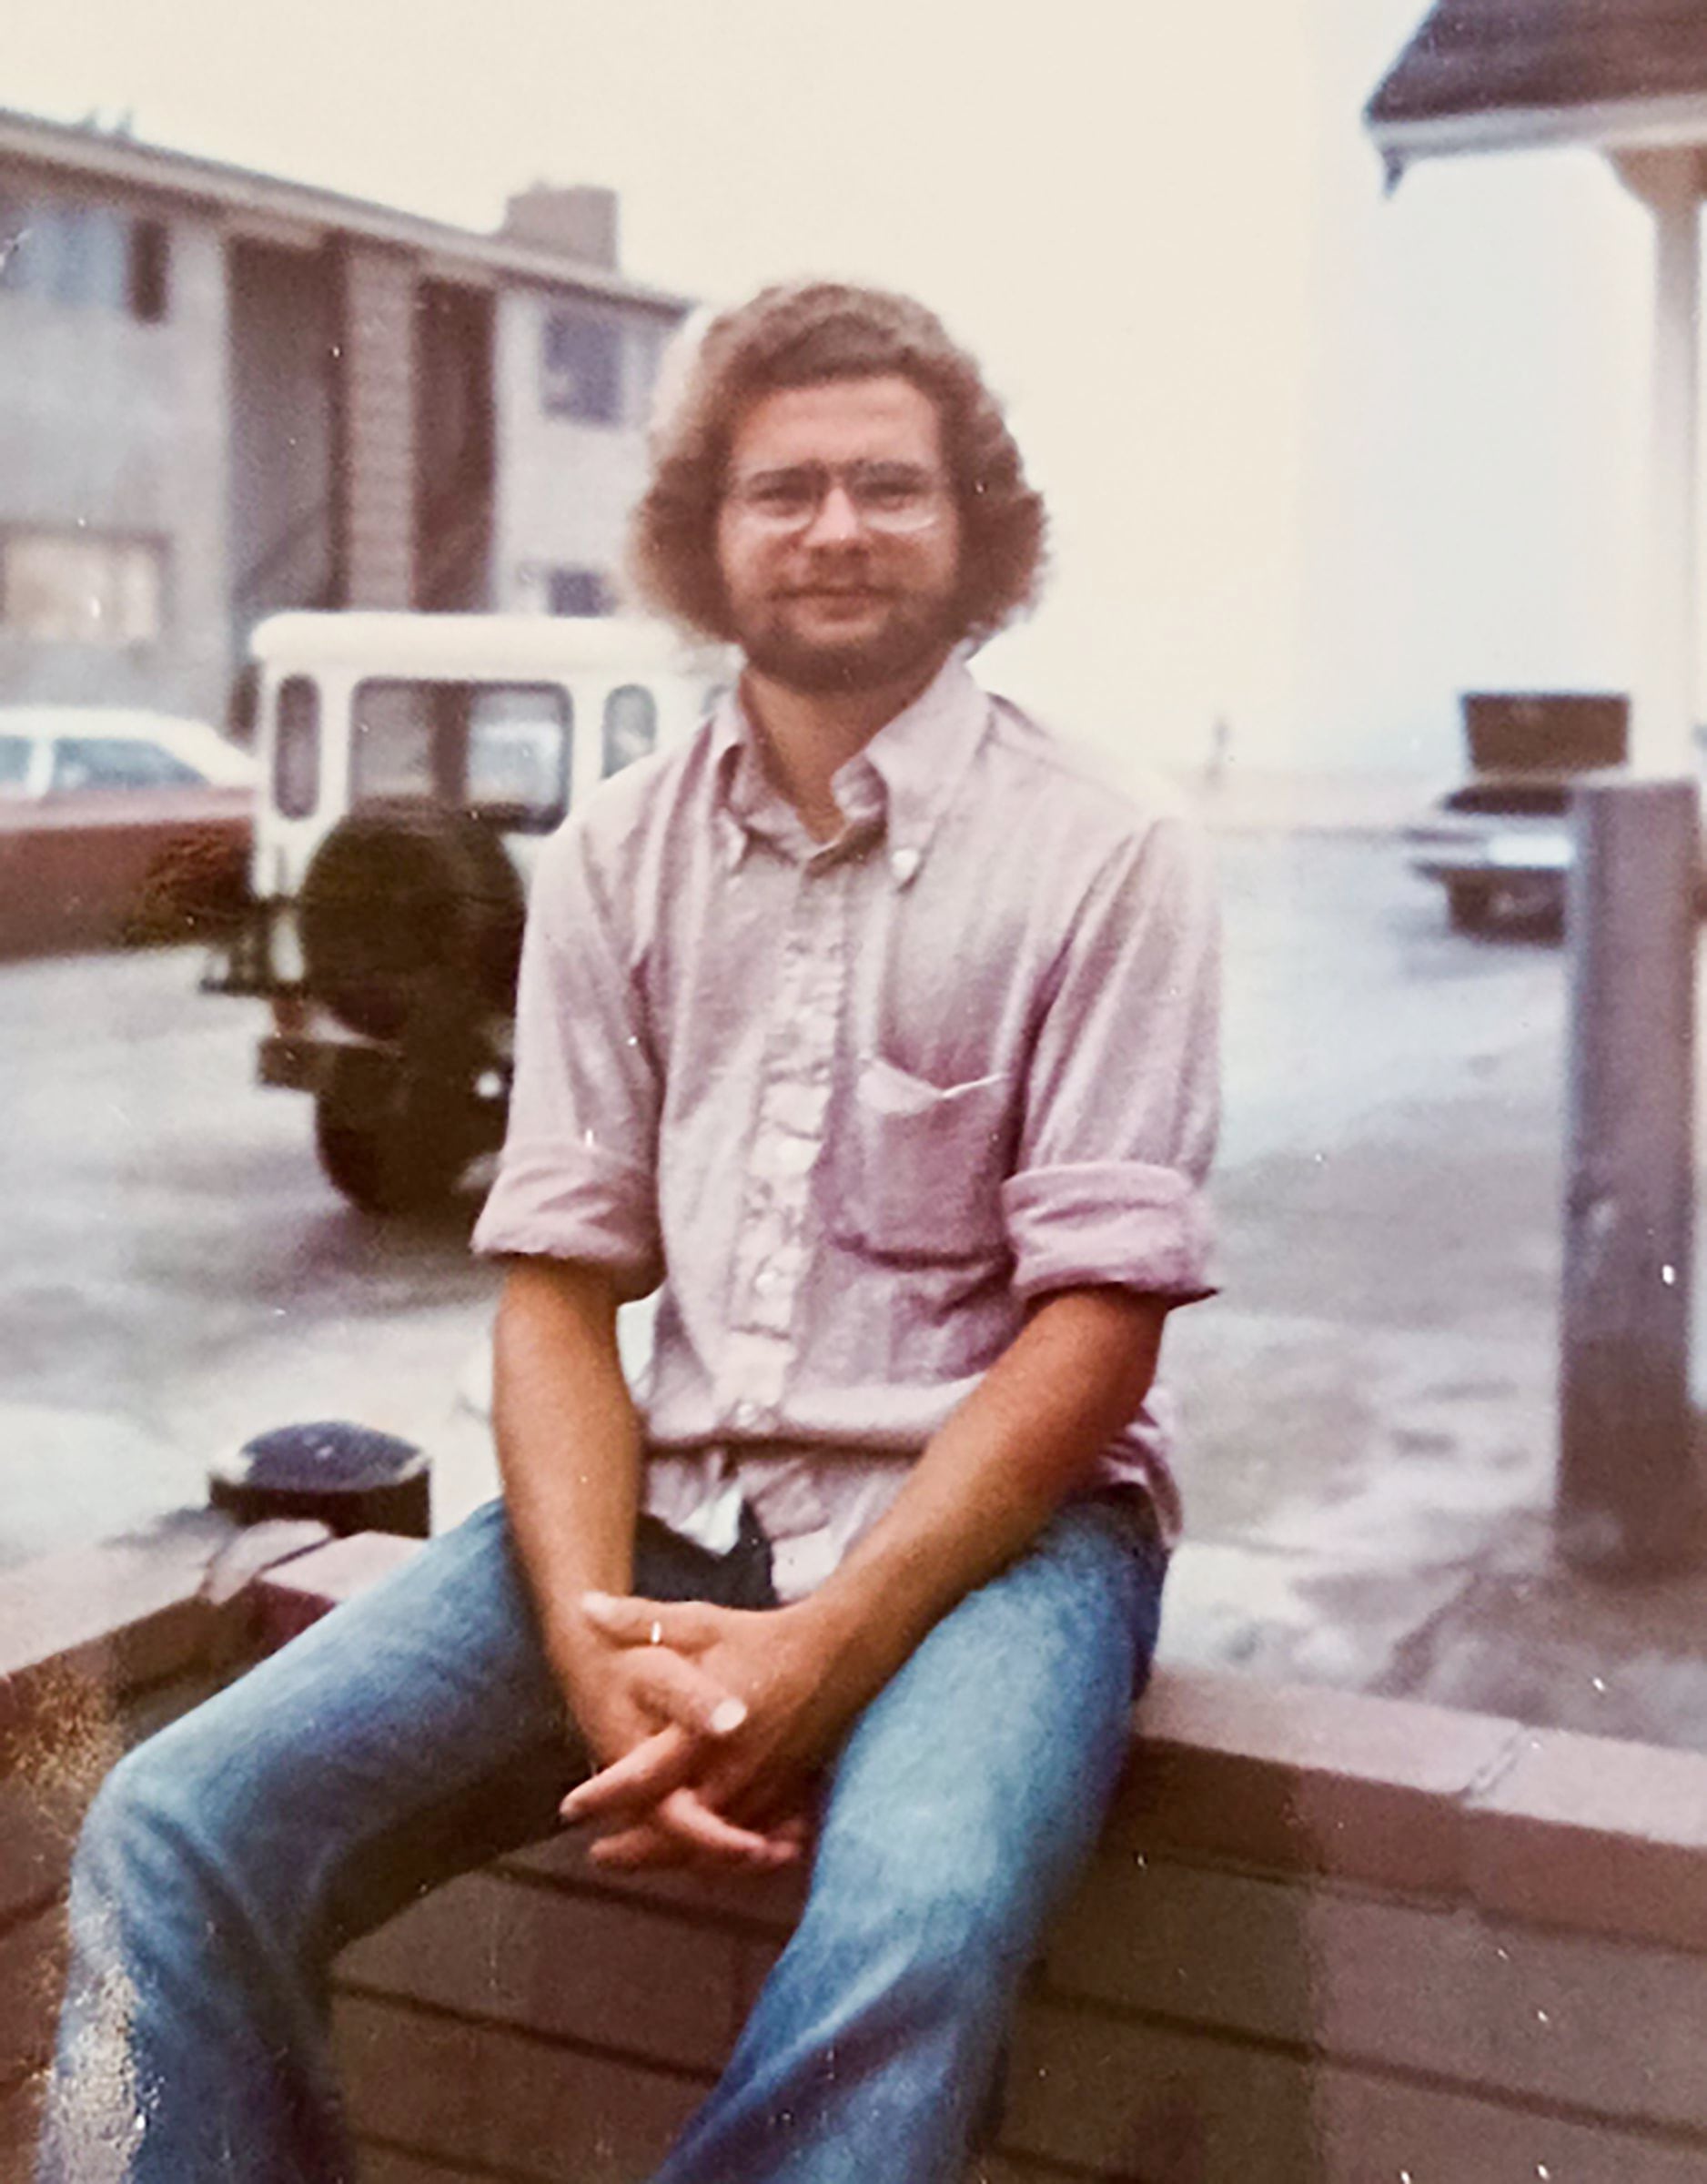 (Kris Robinette) Doug Coleman was the second gay man murdered in Salt Lake City in November of 1978.